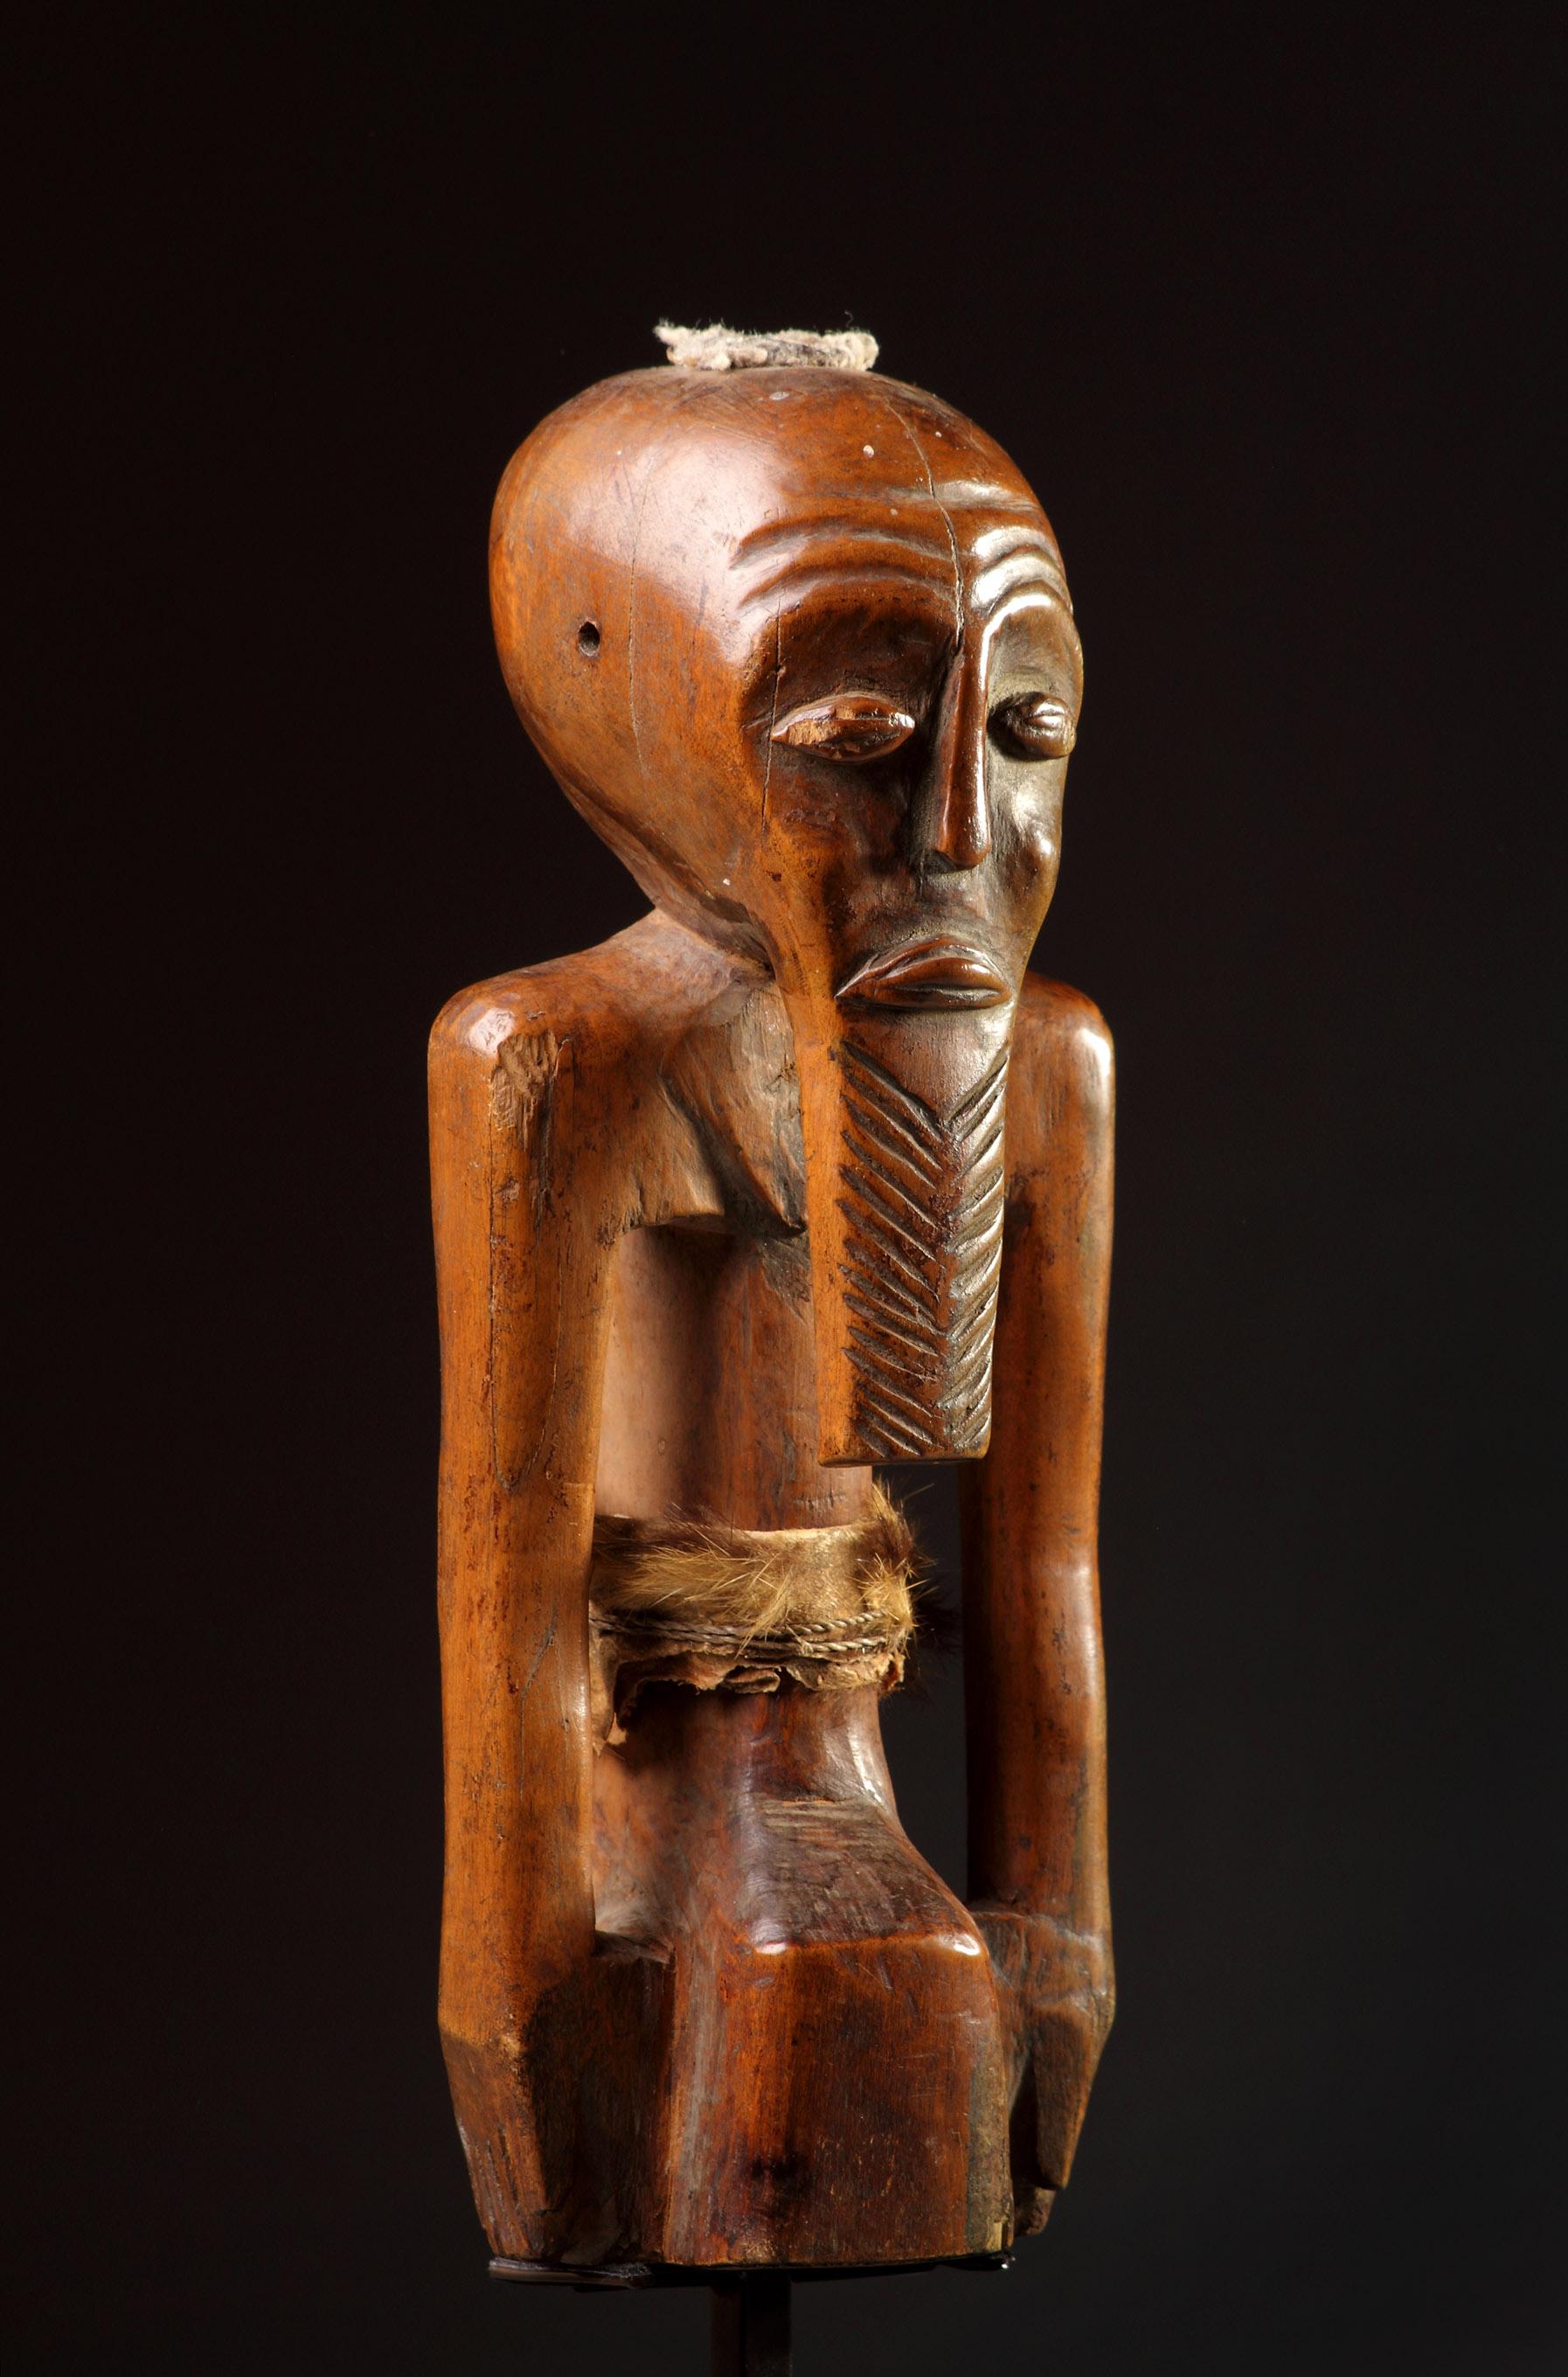 Congolese A South Eastern Congo, Zaire Songye Protective Fetish Figure ‘Nkishi’  For Sale